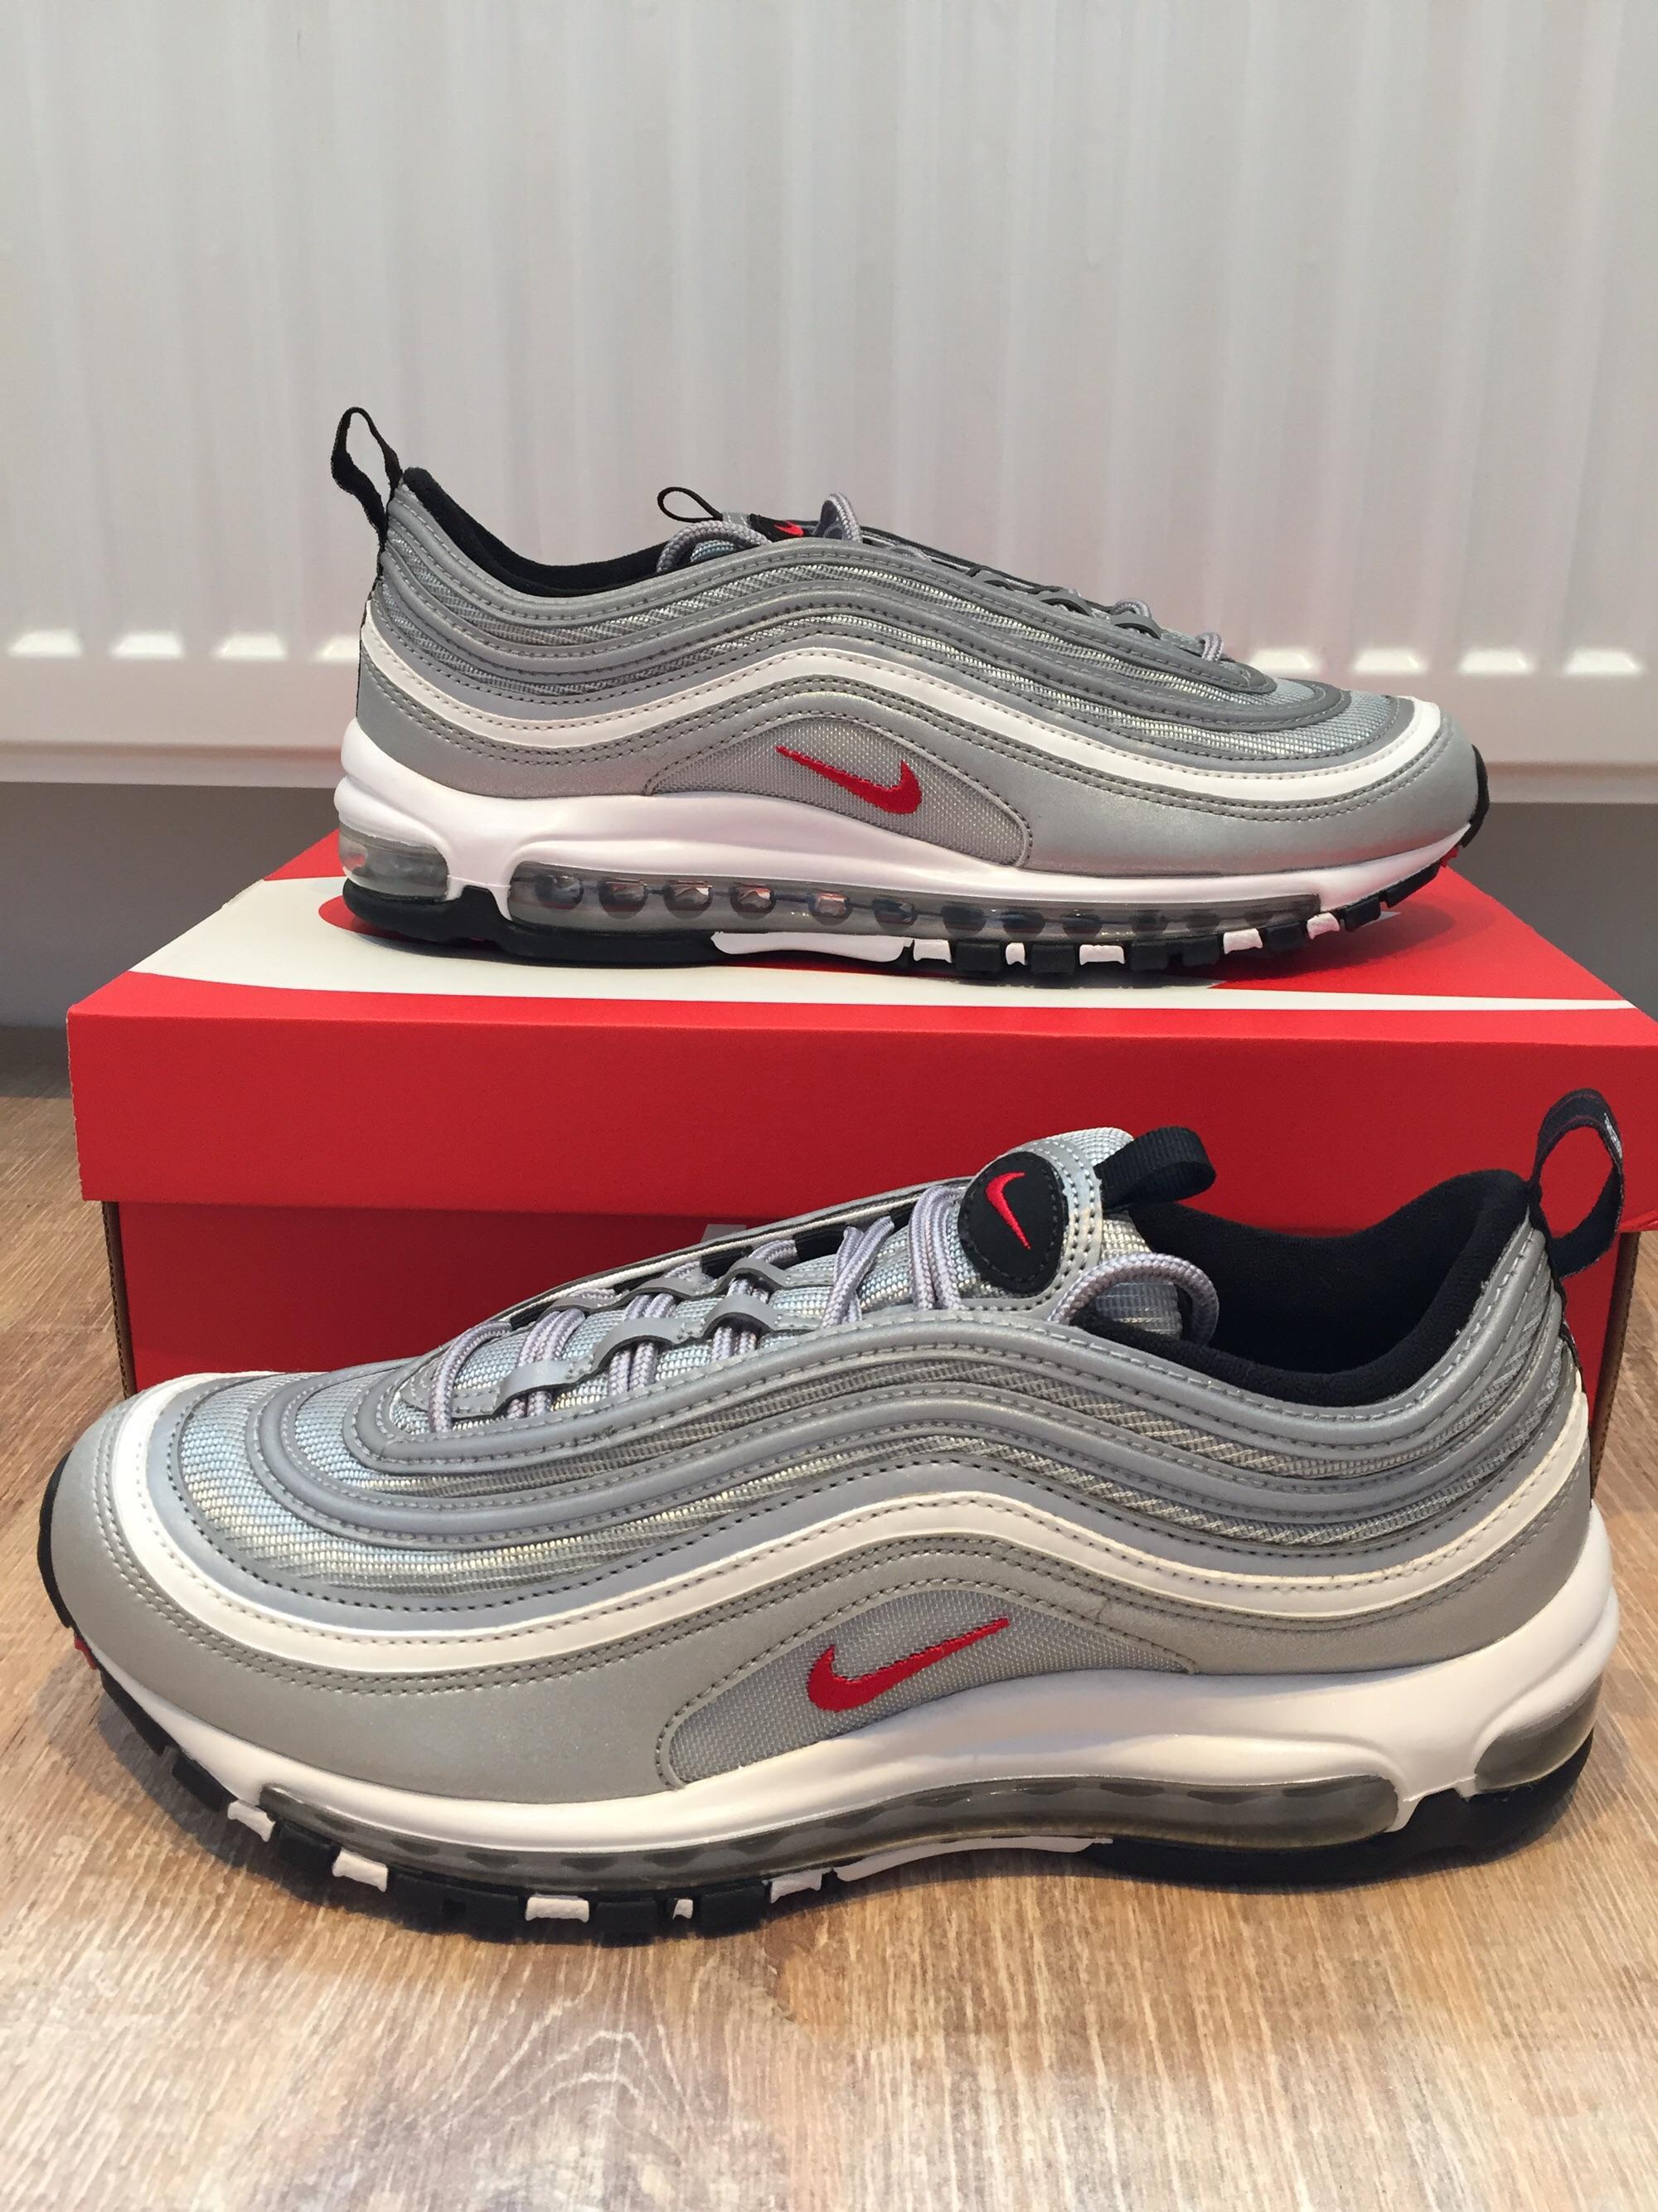 Nike Air Max 97 Trainers Reflective Silver Black Offspring